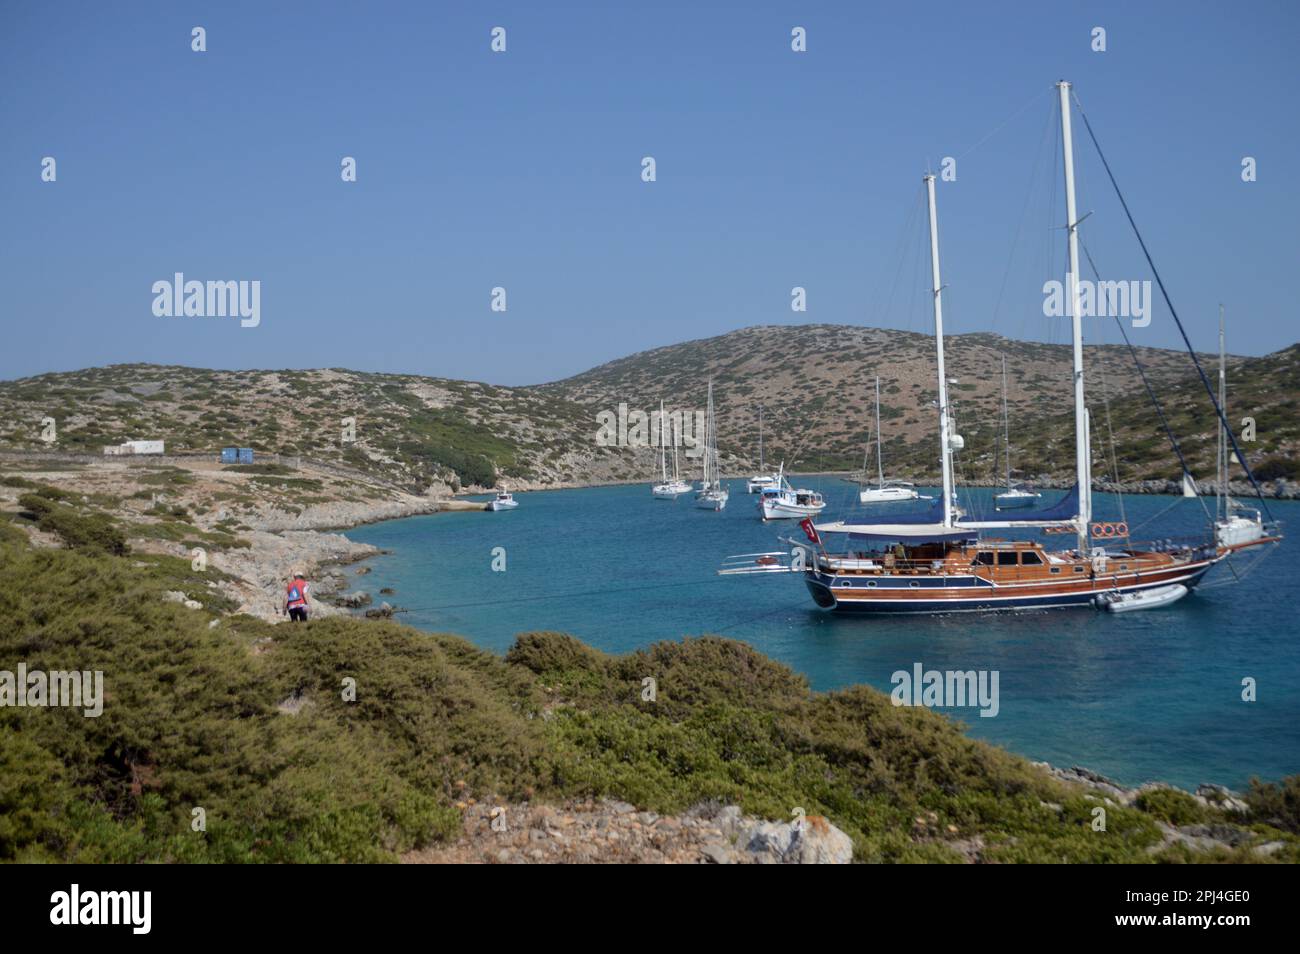 Greece, Island of Levitha (population 10):   a sheltered bay provides refuge for small craft from the Meltemi wind. Stock Photo